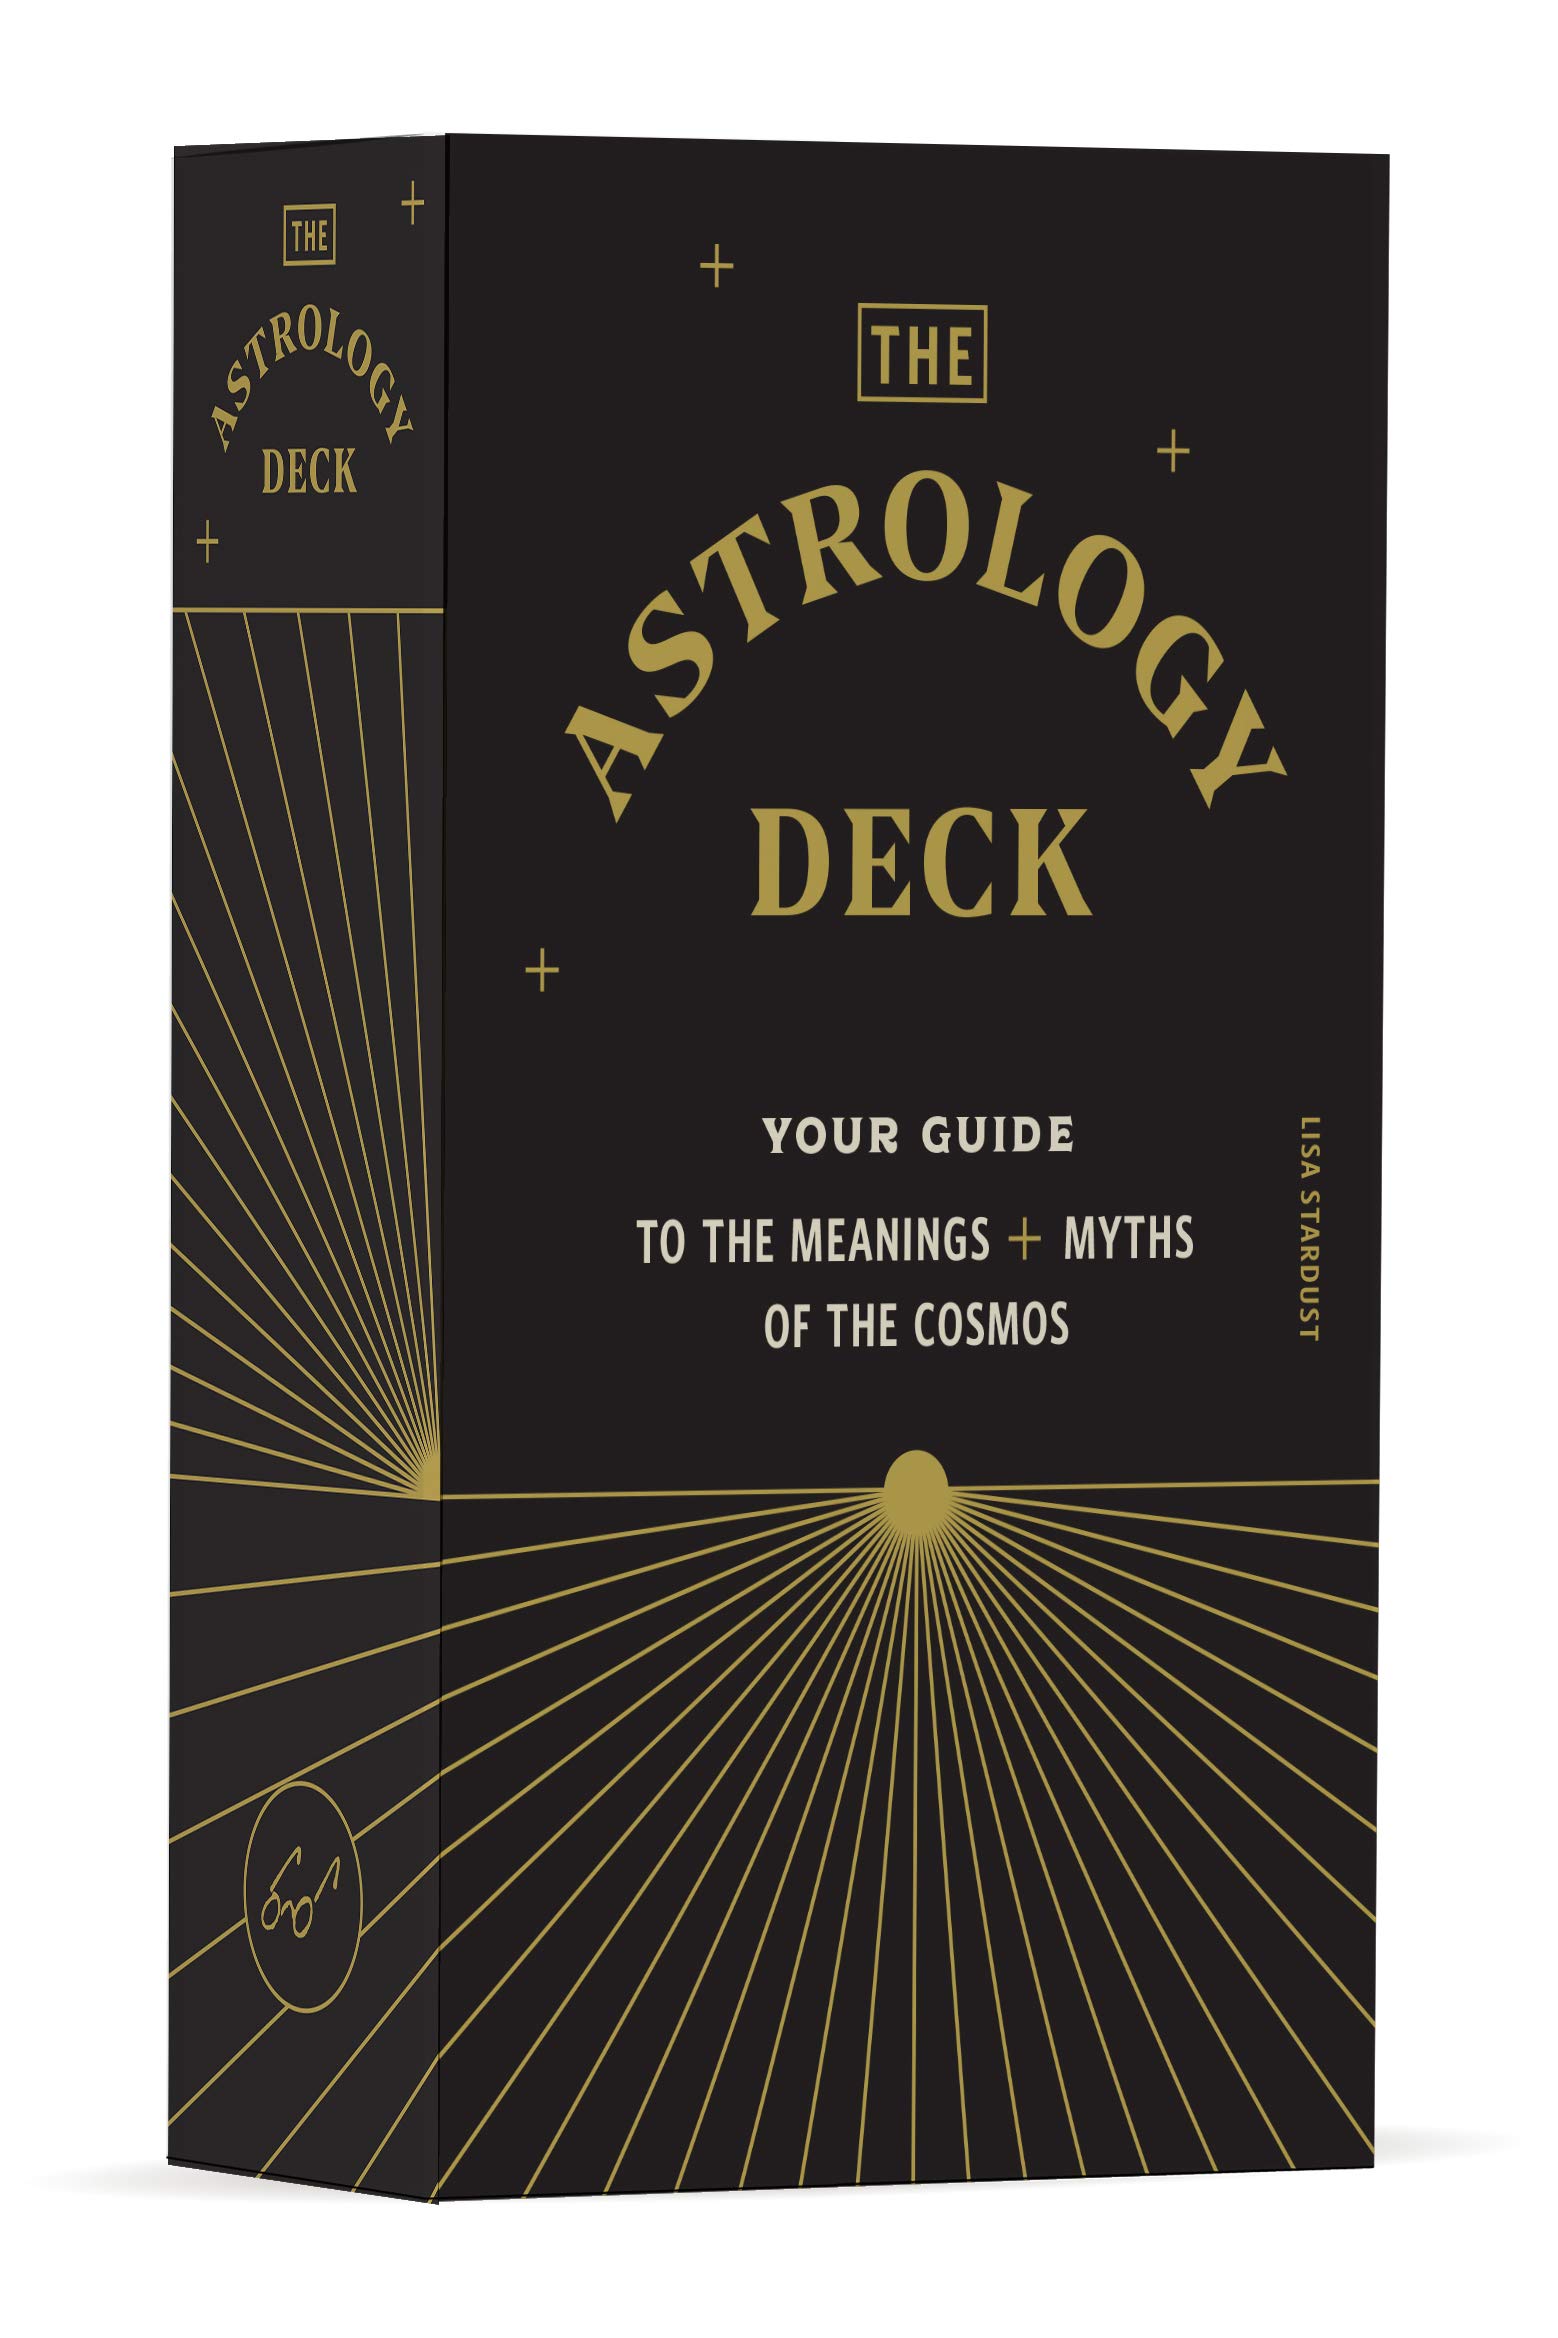 Lisa Stardust's <i&gtThe Astrology Deck: Your Guide to the Meanings and Myths of the Cosmos</I&gt (2021). Courtesy of Amazon.